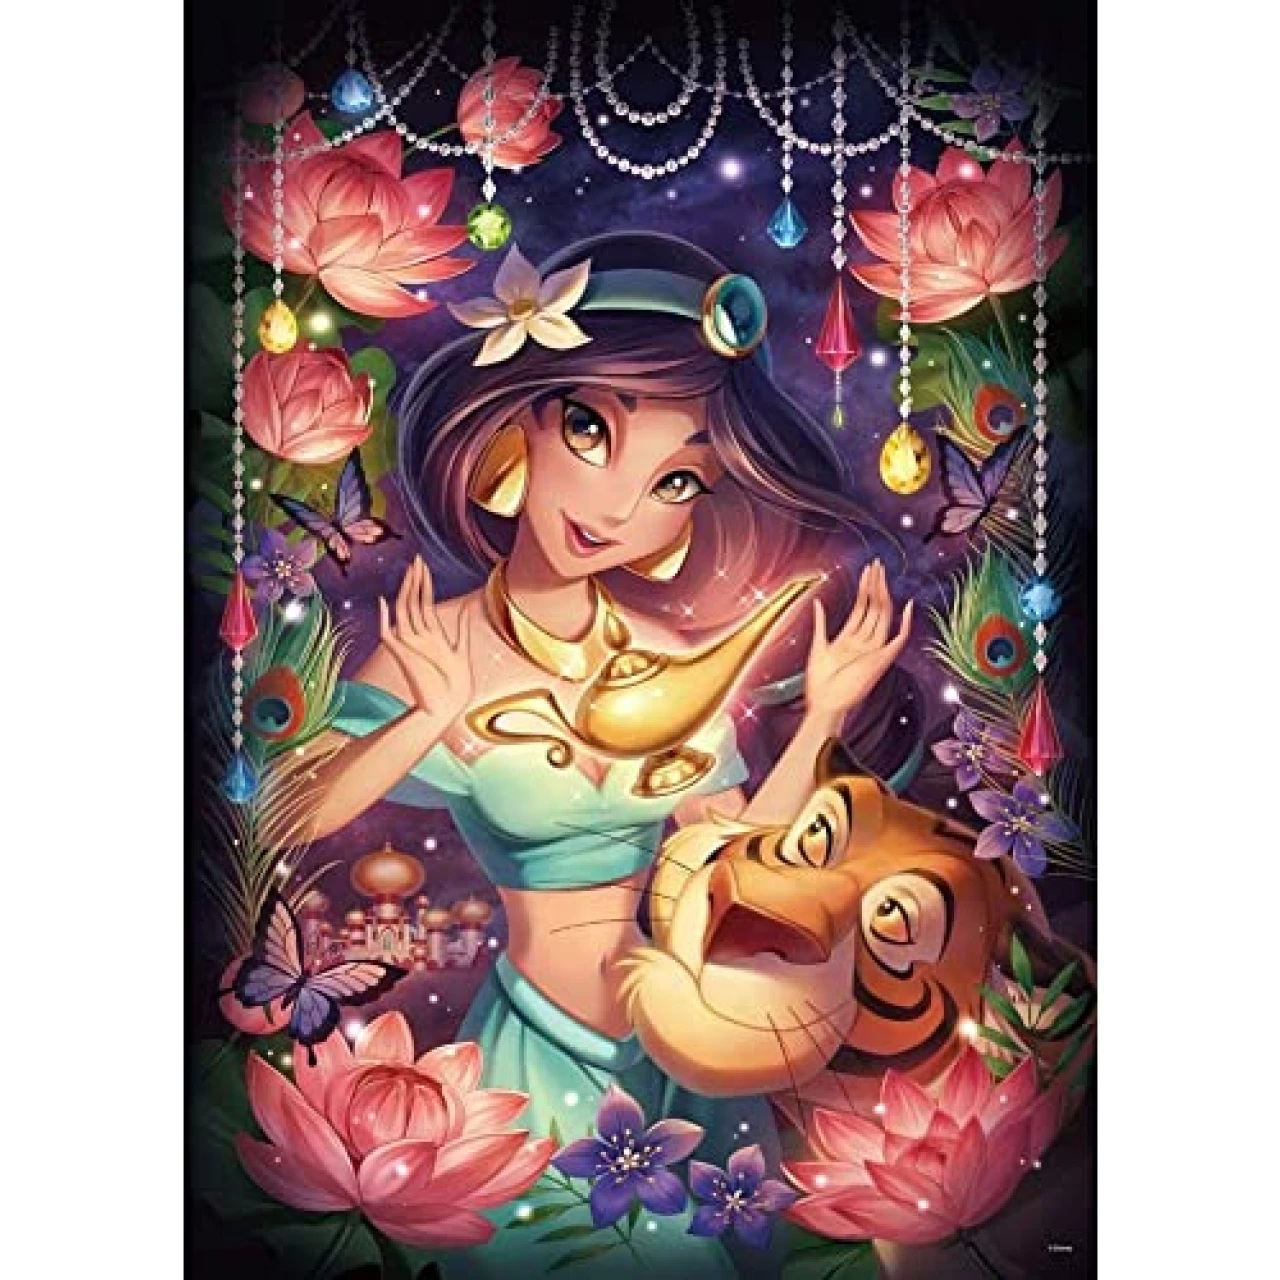 Natopbo Diamond Painting Kits for Adults - 5D Diamond Art Kits for Adults Kids Beginner,DIY Jasmine Full Drill Paintings with Diamonds Gem Art for Adults Home Wall Decor 11.8x15.7inch